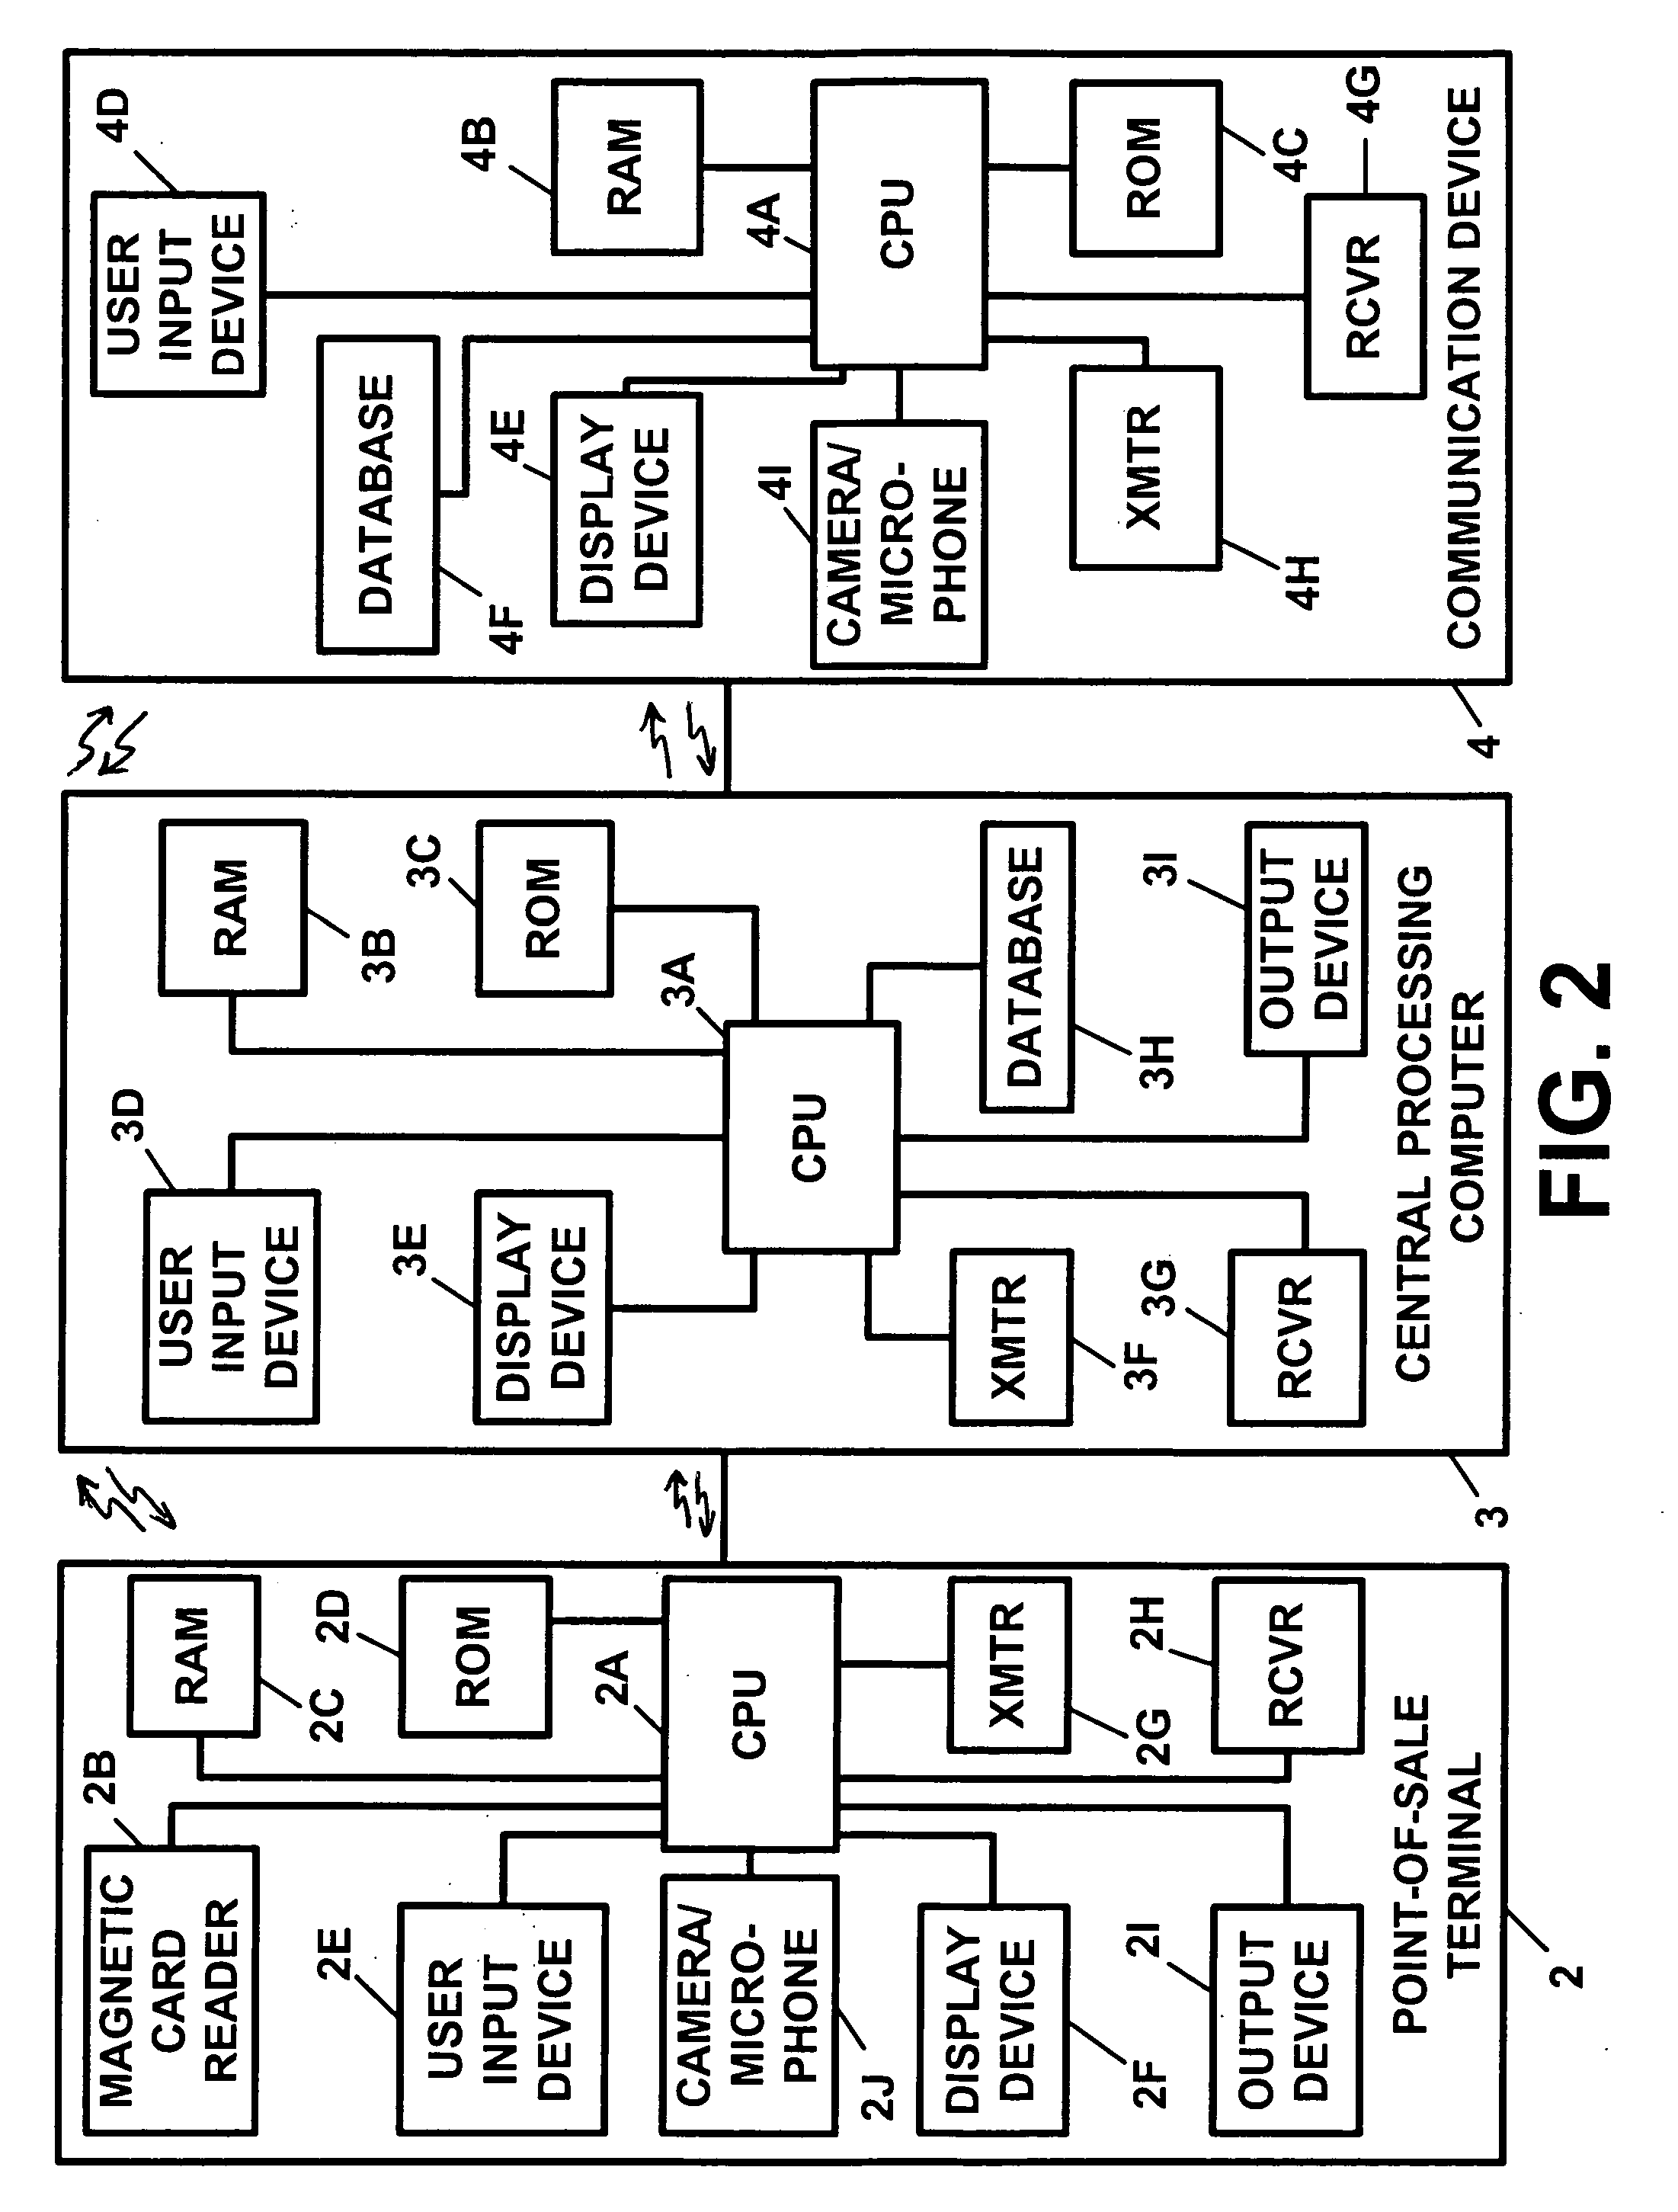 Transaction security apparatus and method